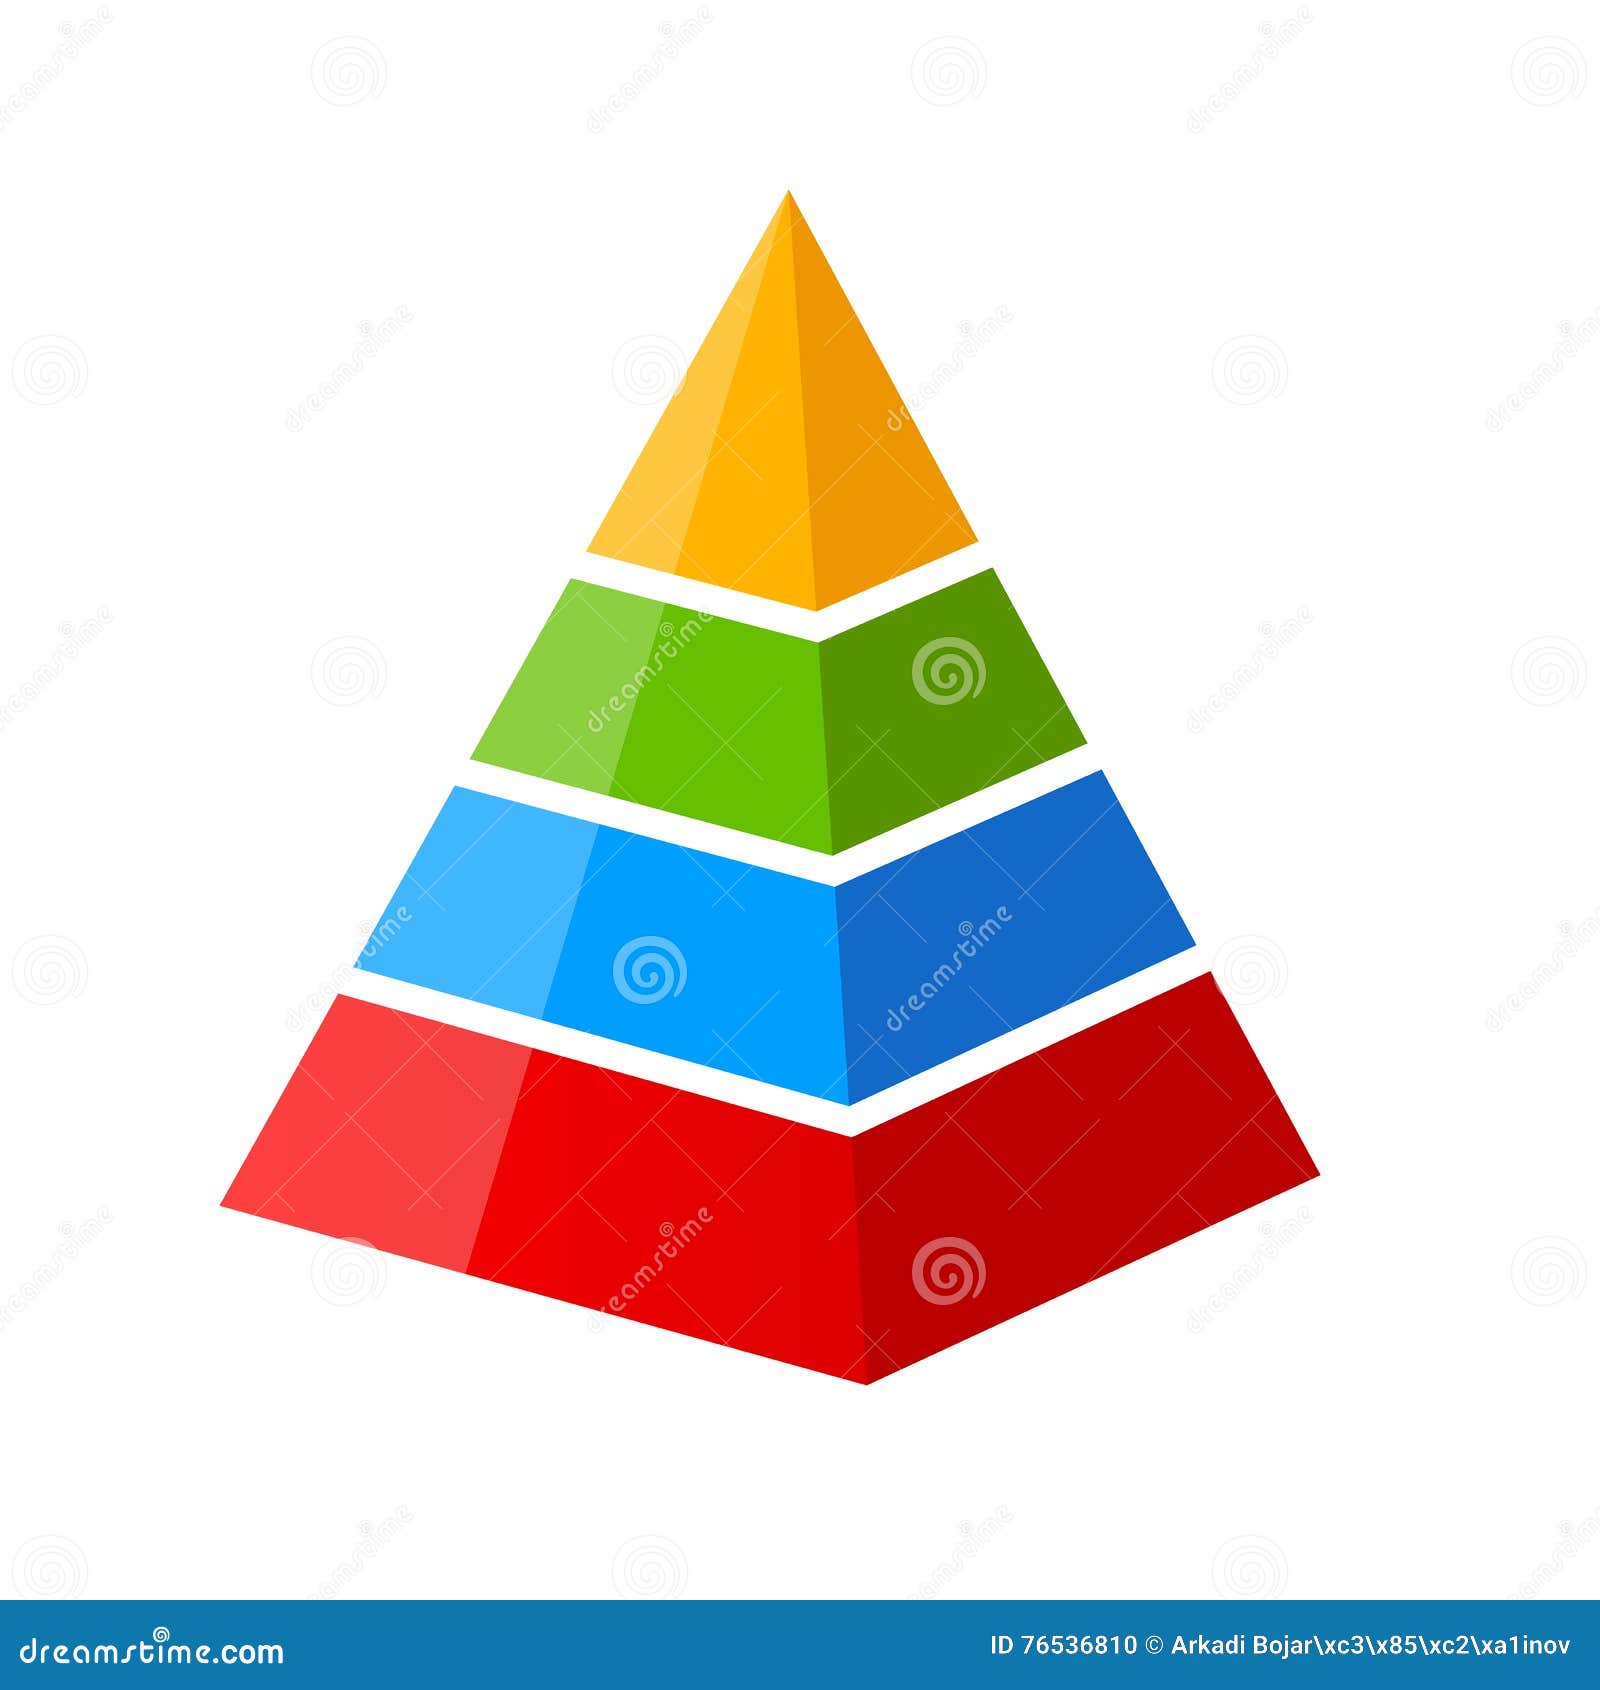 Four part pyramid diagram stock vector. Illustration of four - 76536810